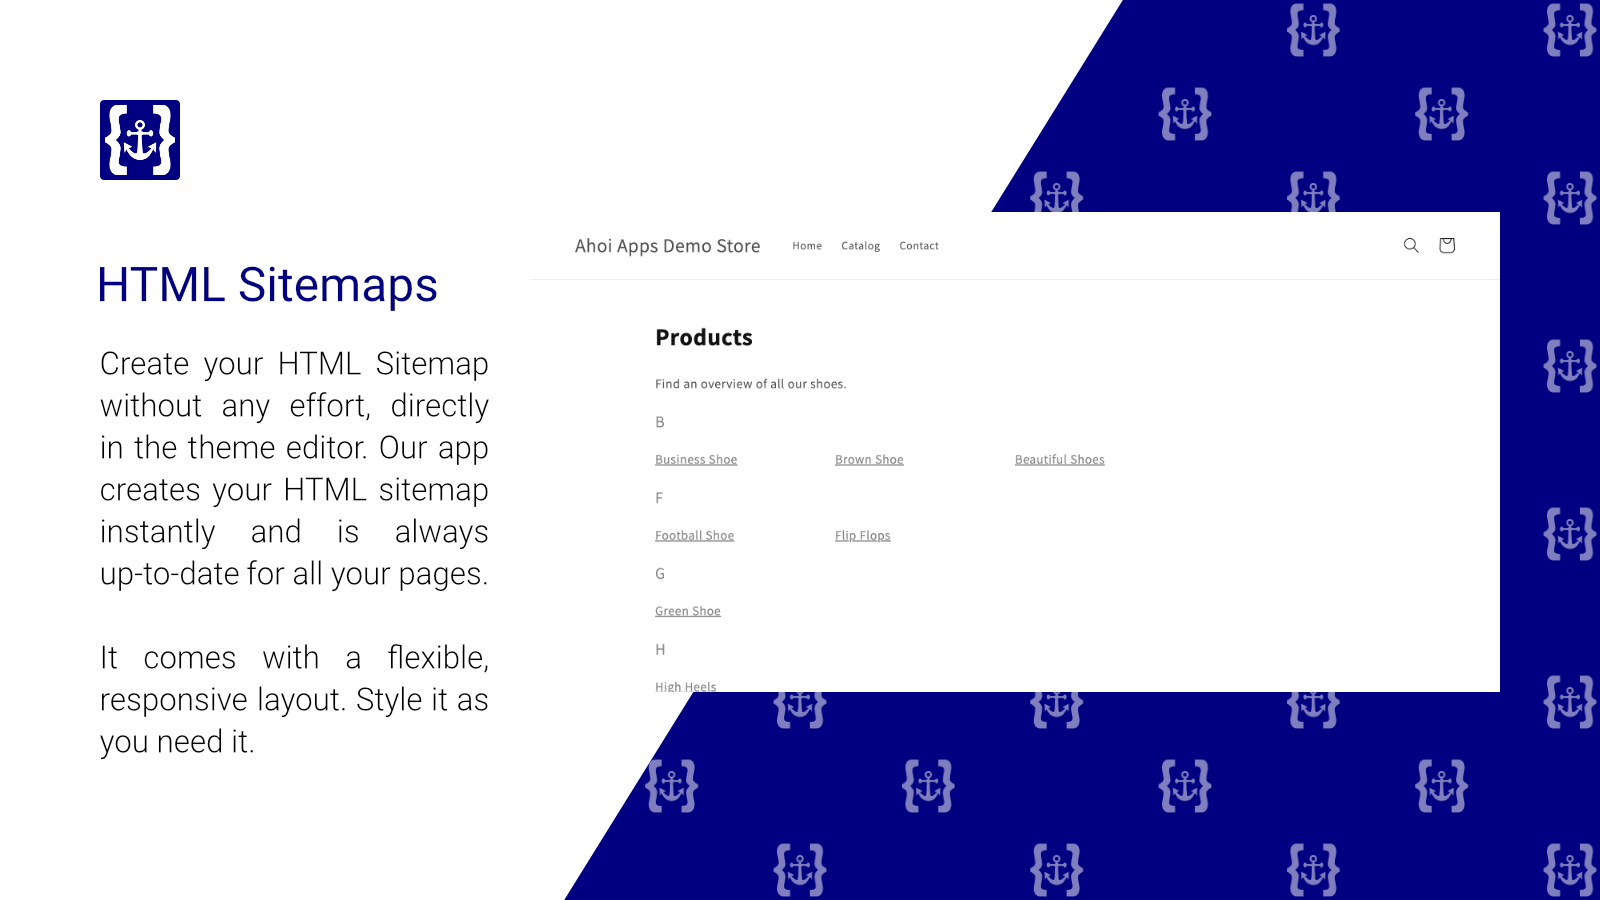 Easily create HTML Sitemaps within your theme editor